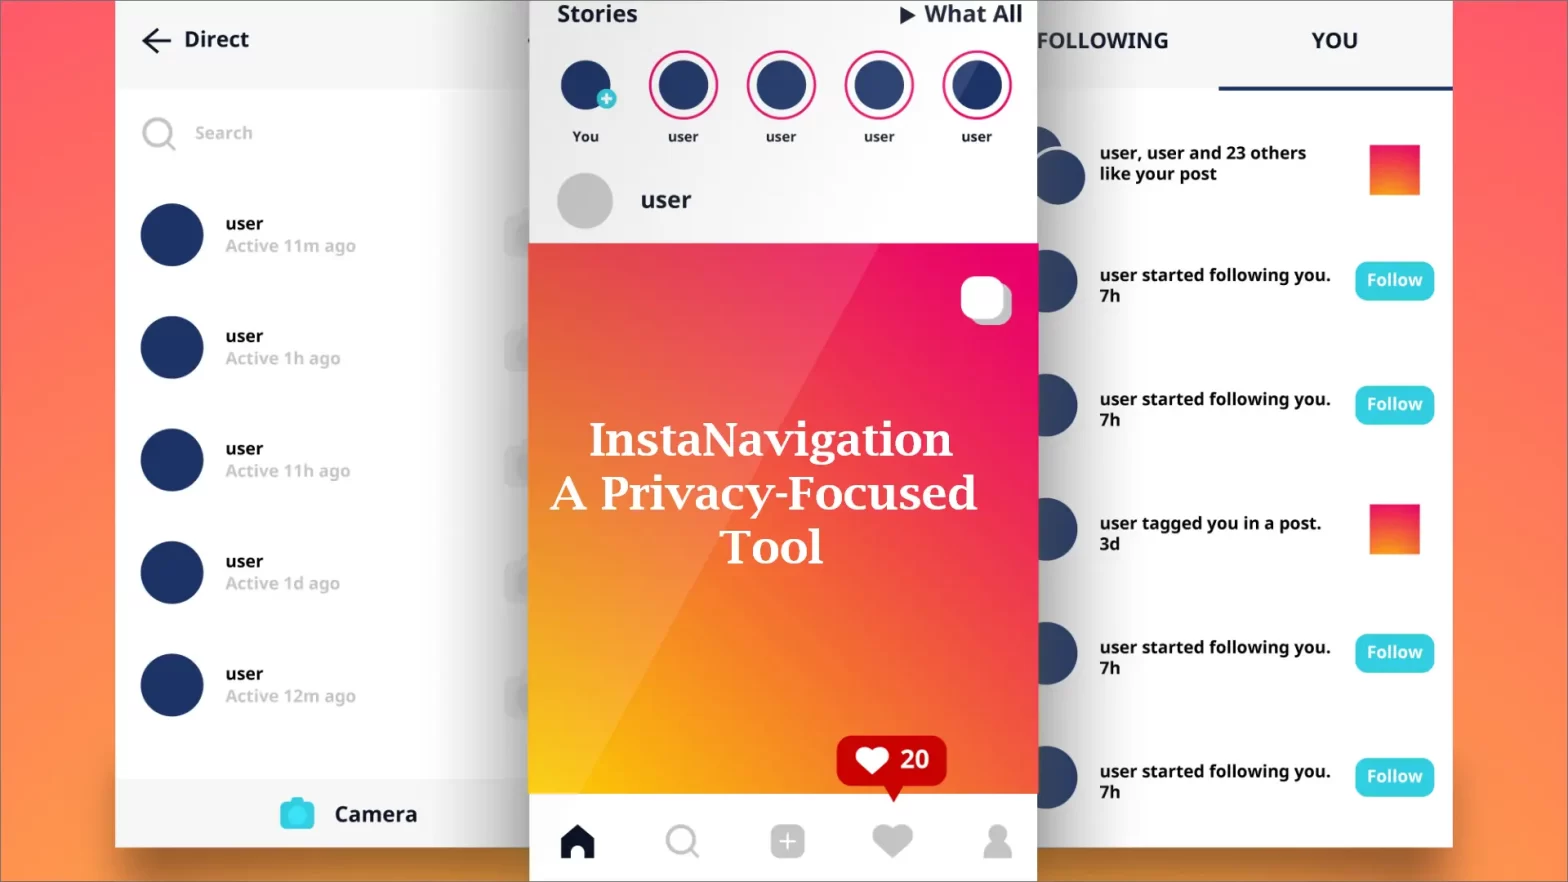 Explore InstaNavigation - A Privacy-Focused Tool